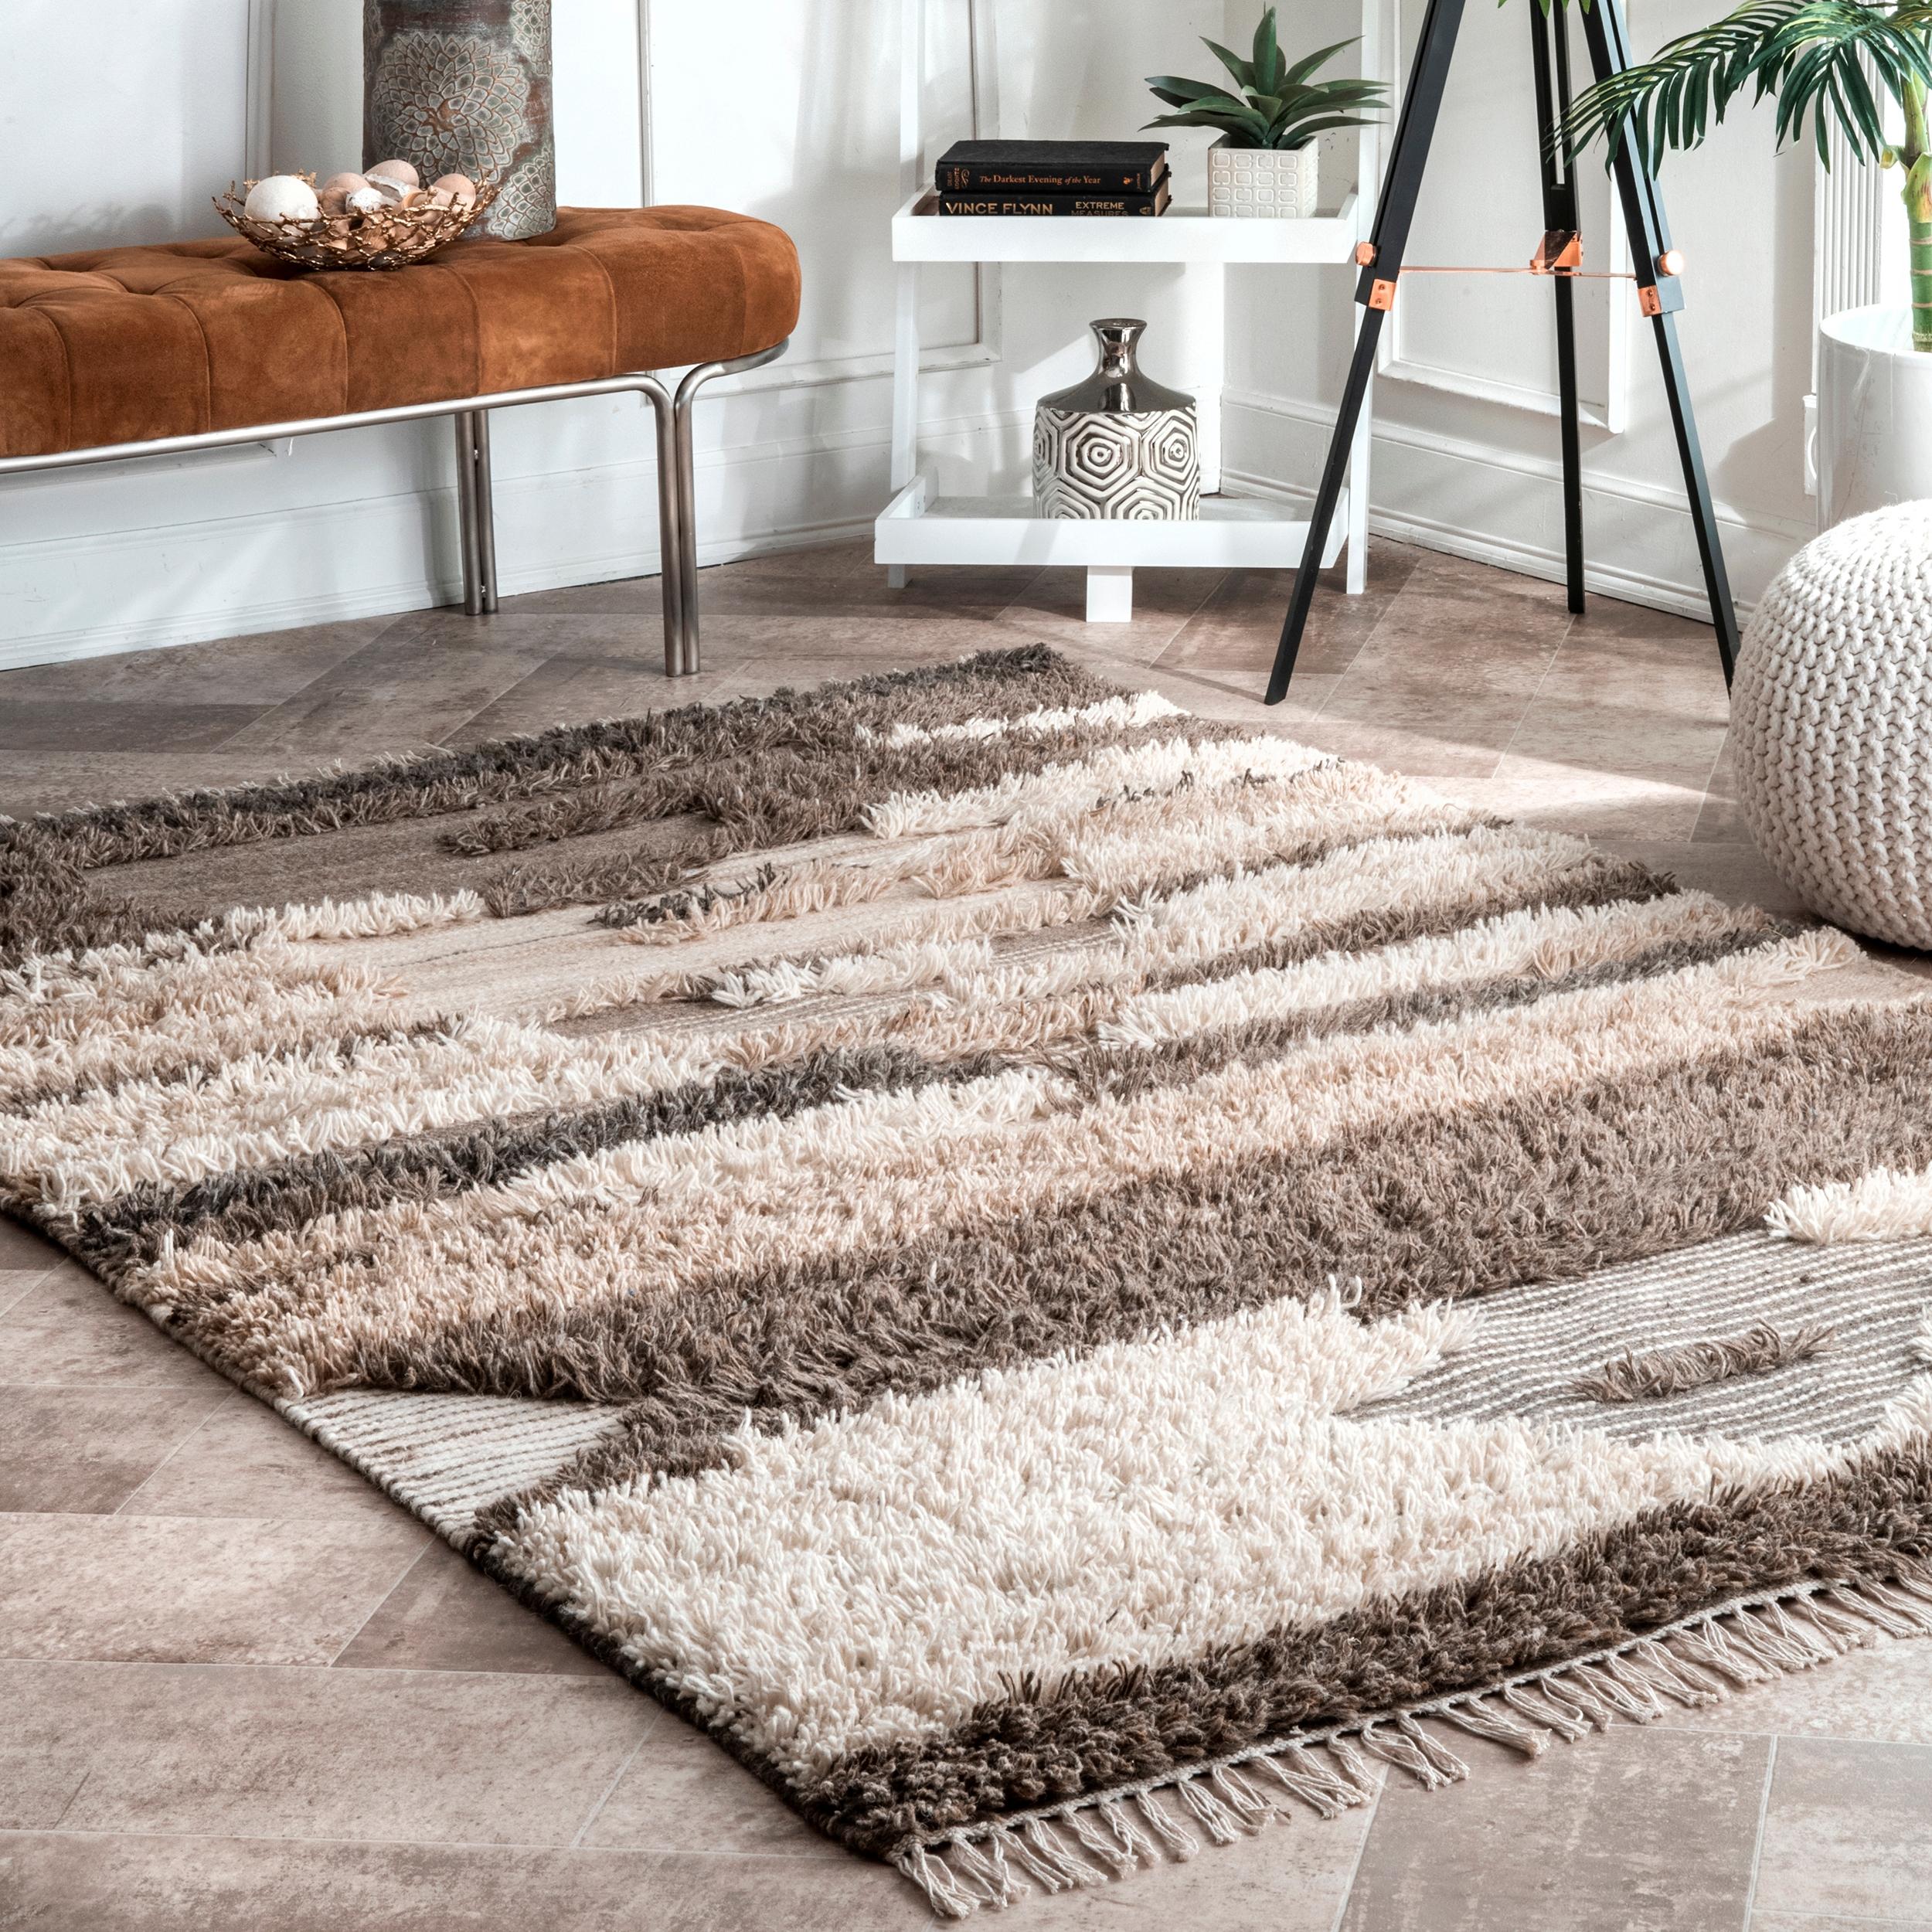 nuLOOM Zora 8 X 10 (ft) Wool Brown Indoor Abstract Area Rug in the Rugs ...